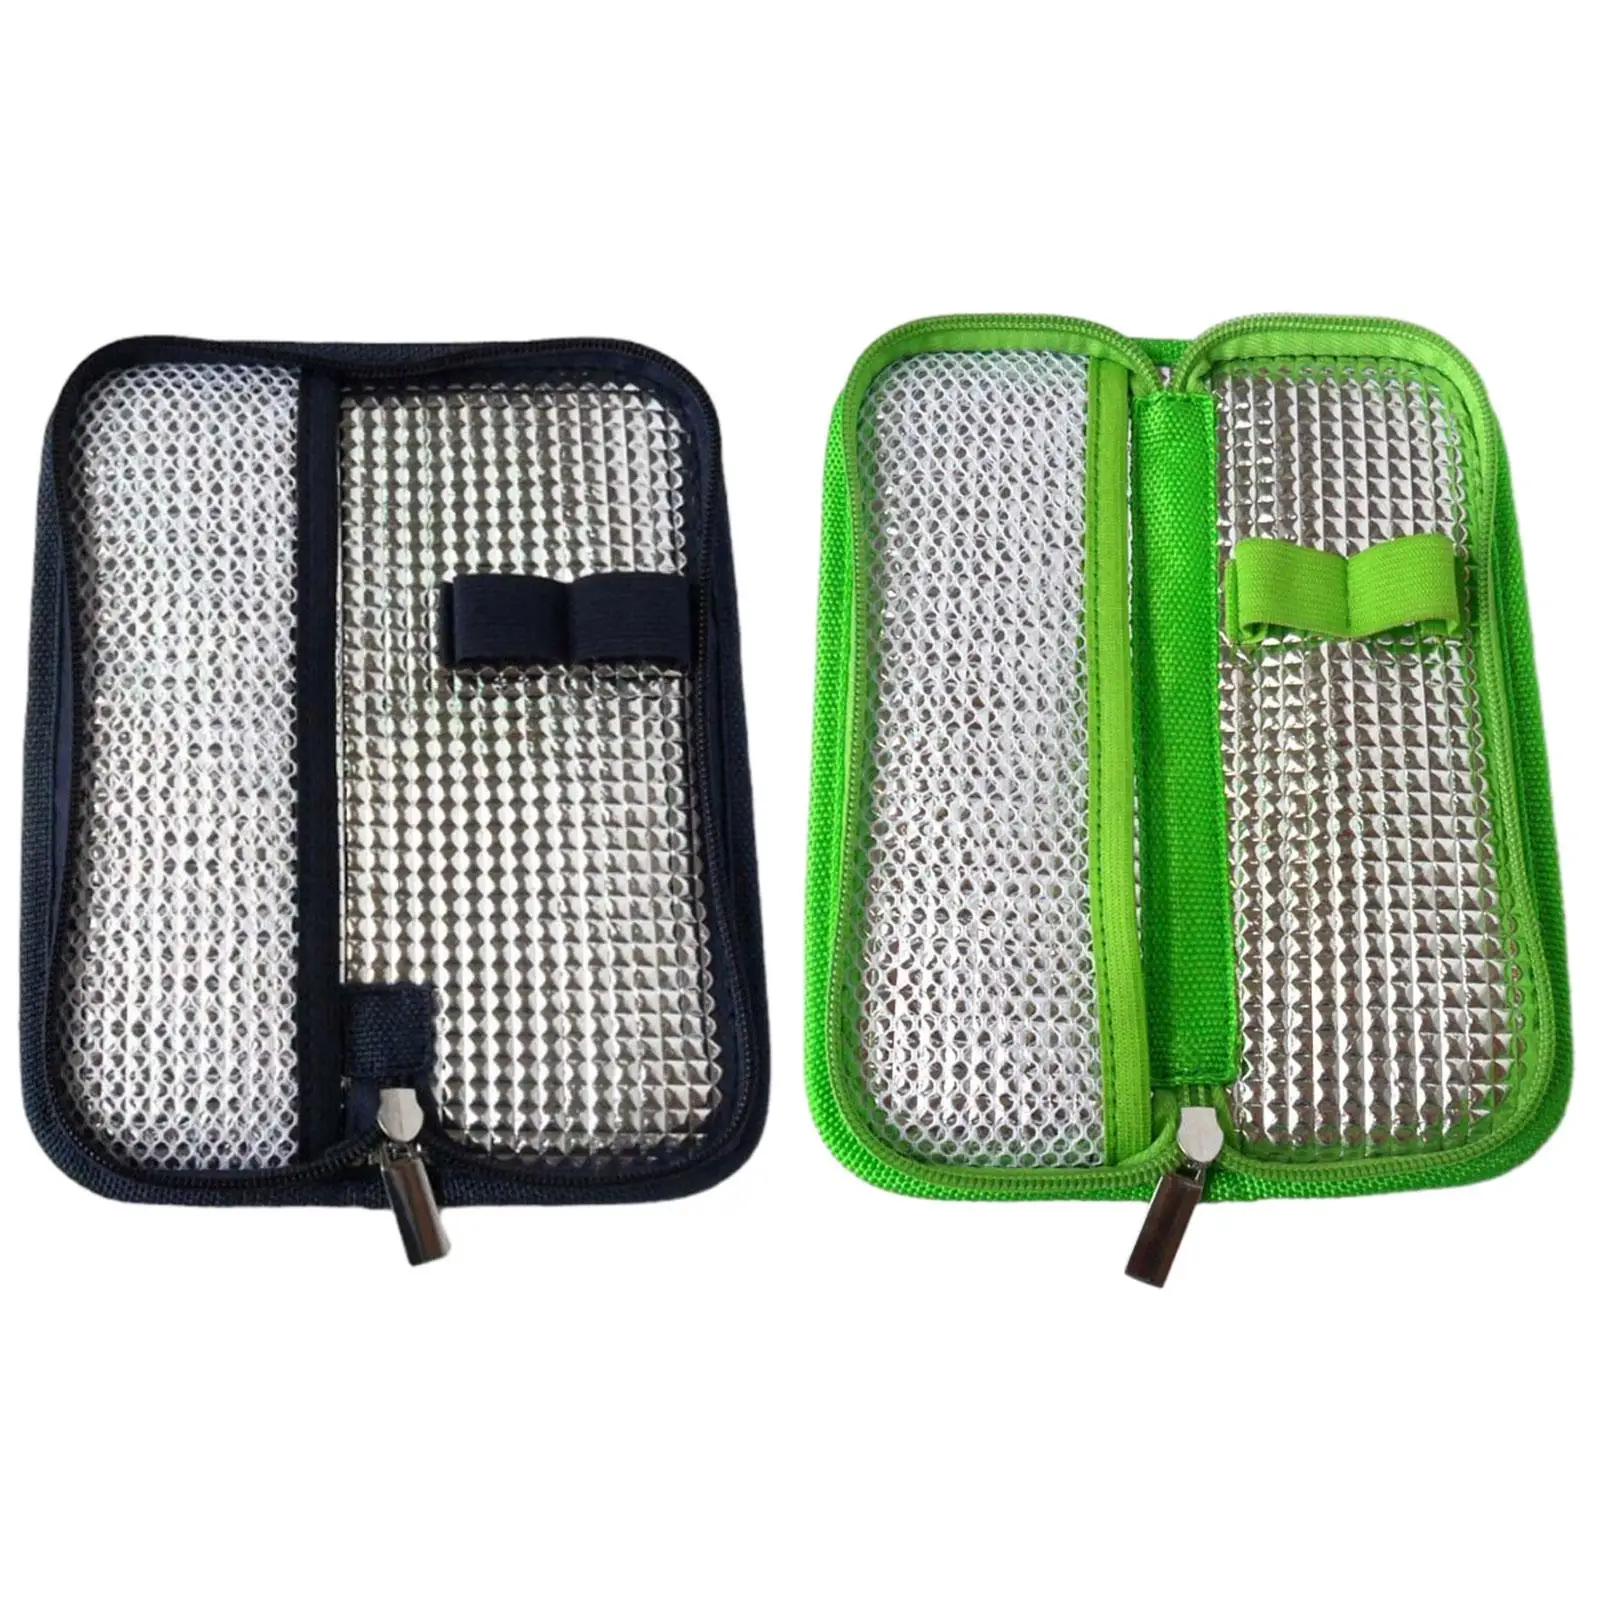 Insulation Cooling Bag Cooling Pocket Ice Packs Supplies Convenient with 2 Elastic Hoop Organizer Insulation Storage Bag